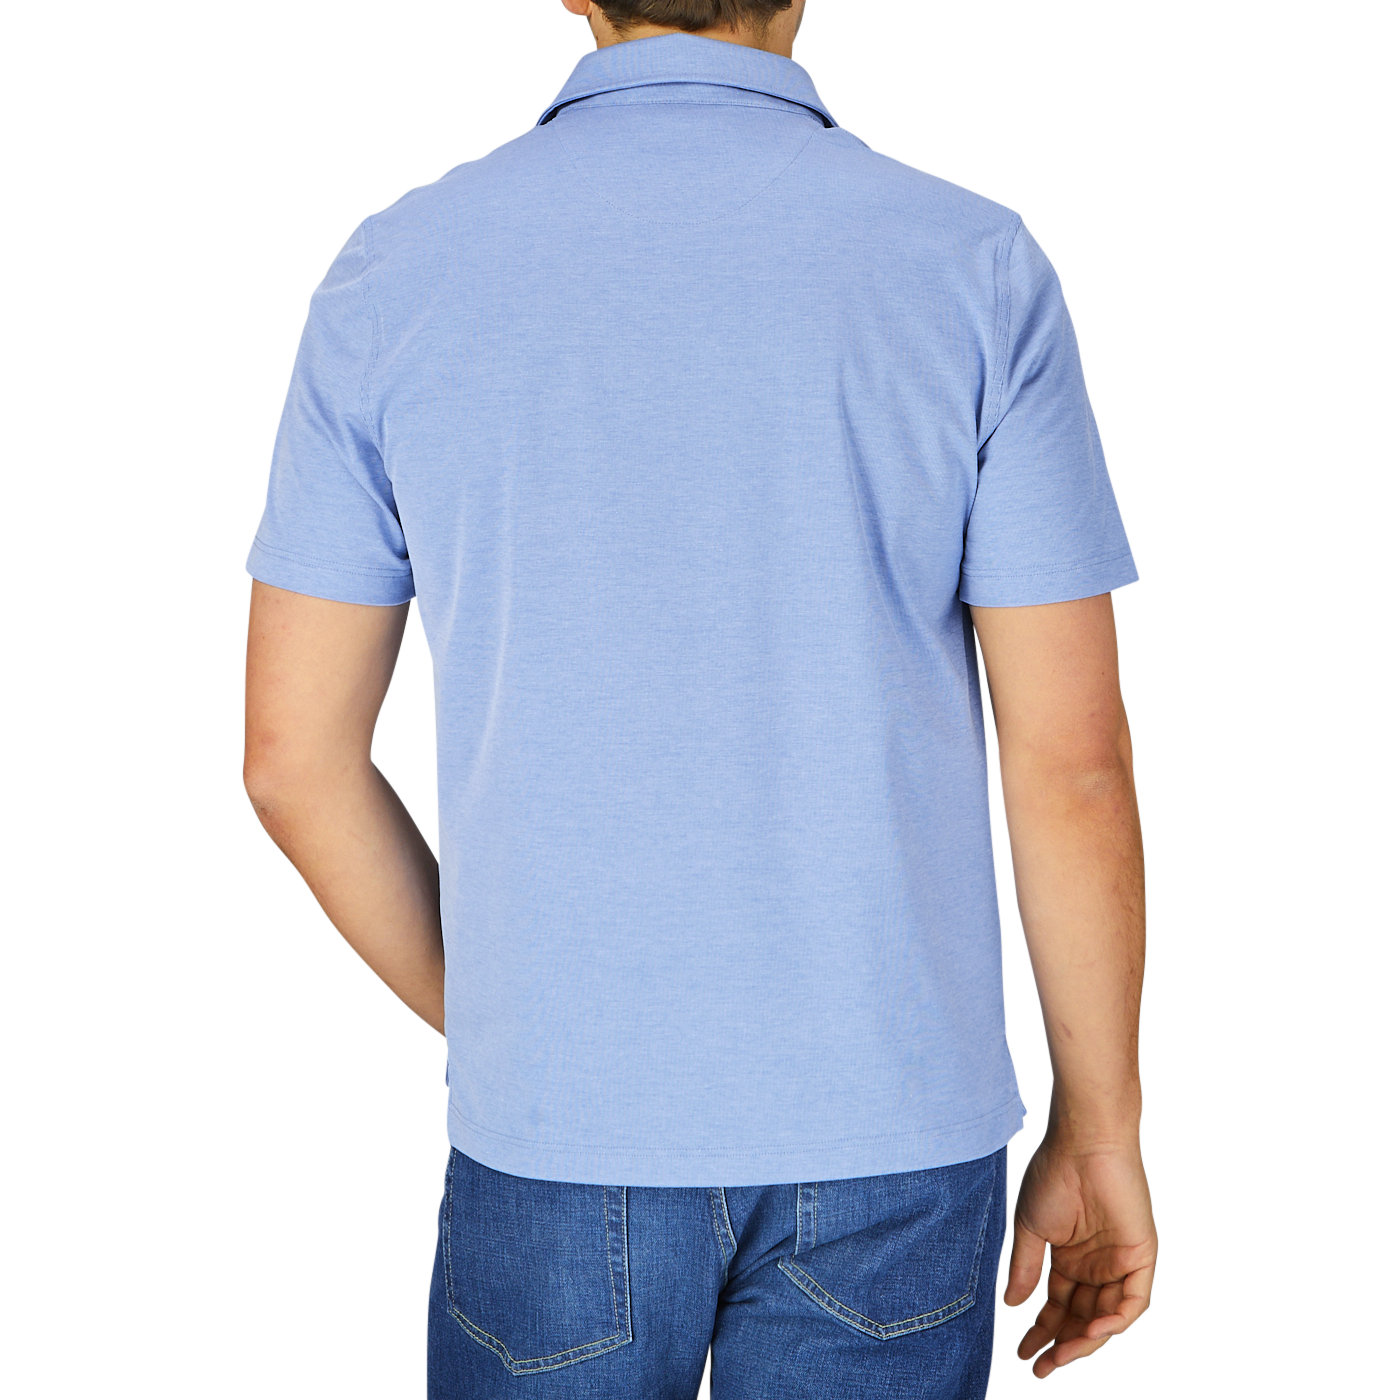 Man wearing a slim fit, blue Fedeli Fil-a-Fil Cotton Jersey Polo Shirt and jeans, viewed from behind.